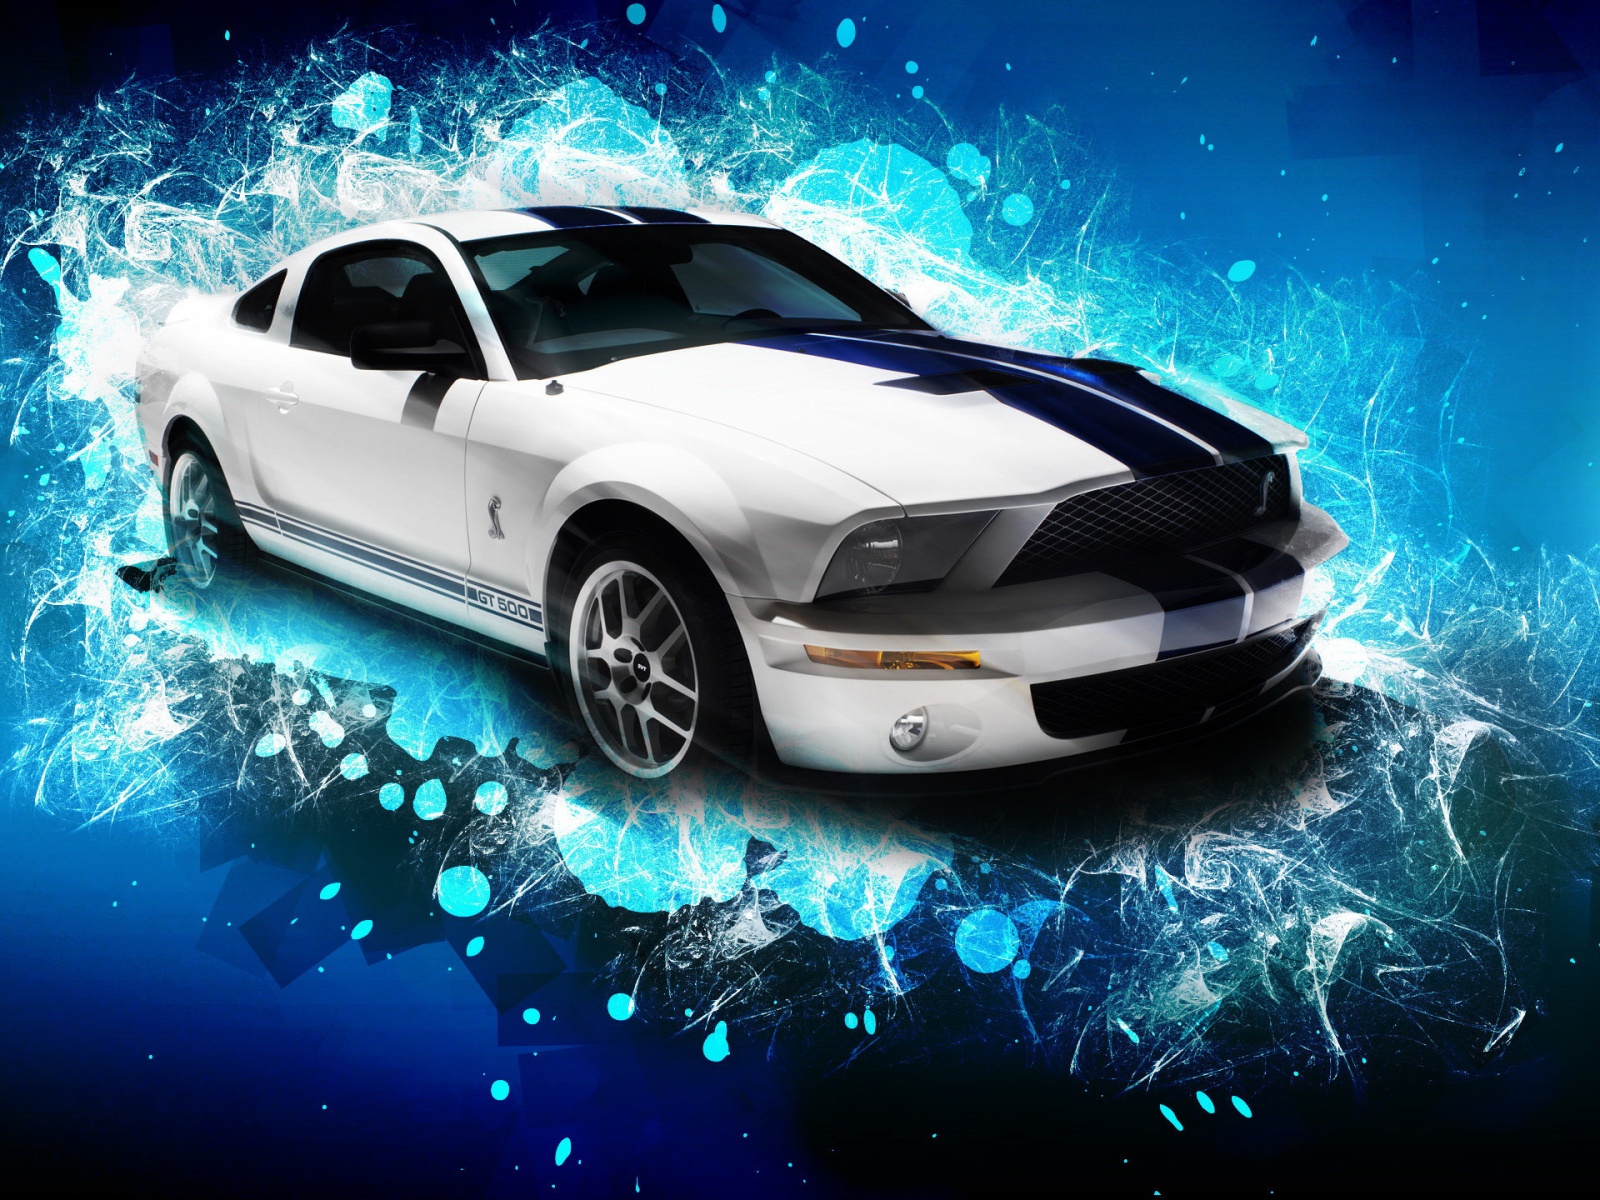 Ford Shelby GT500 Abstract Backgrounds